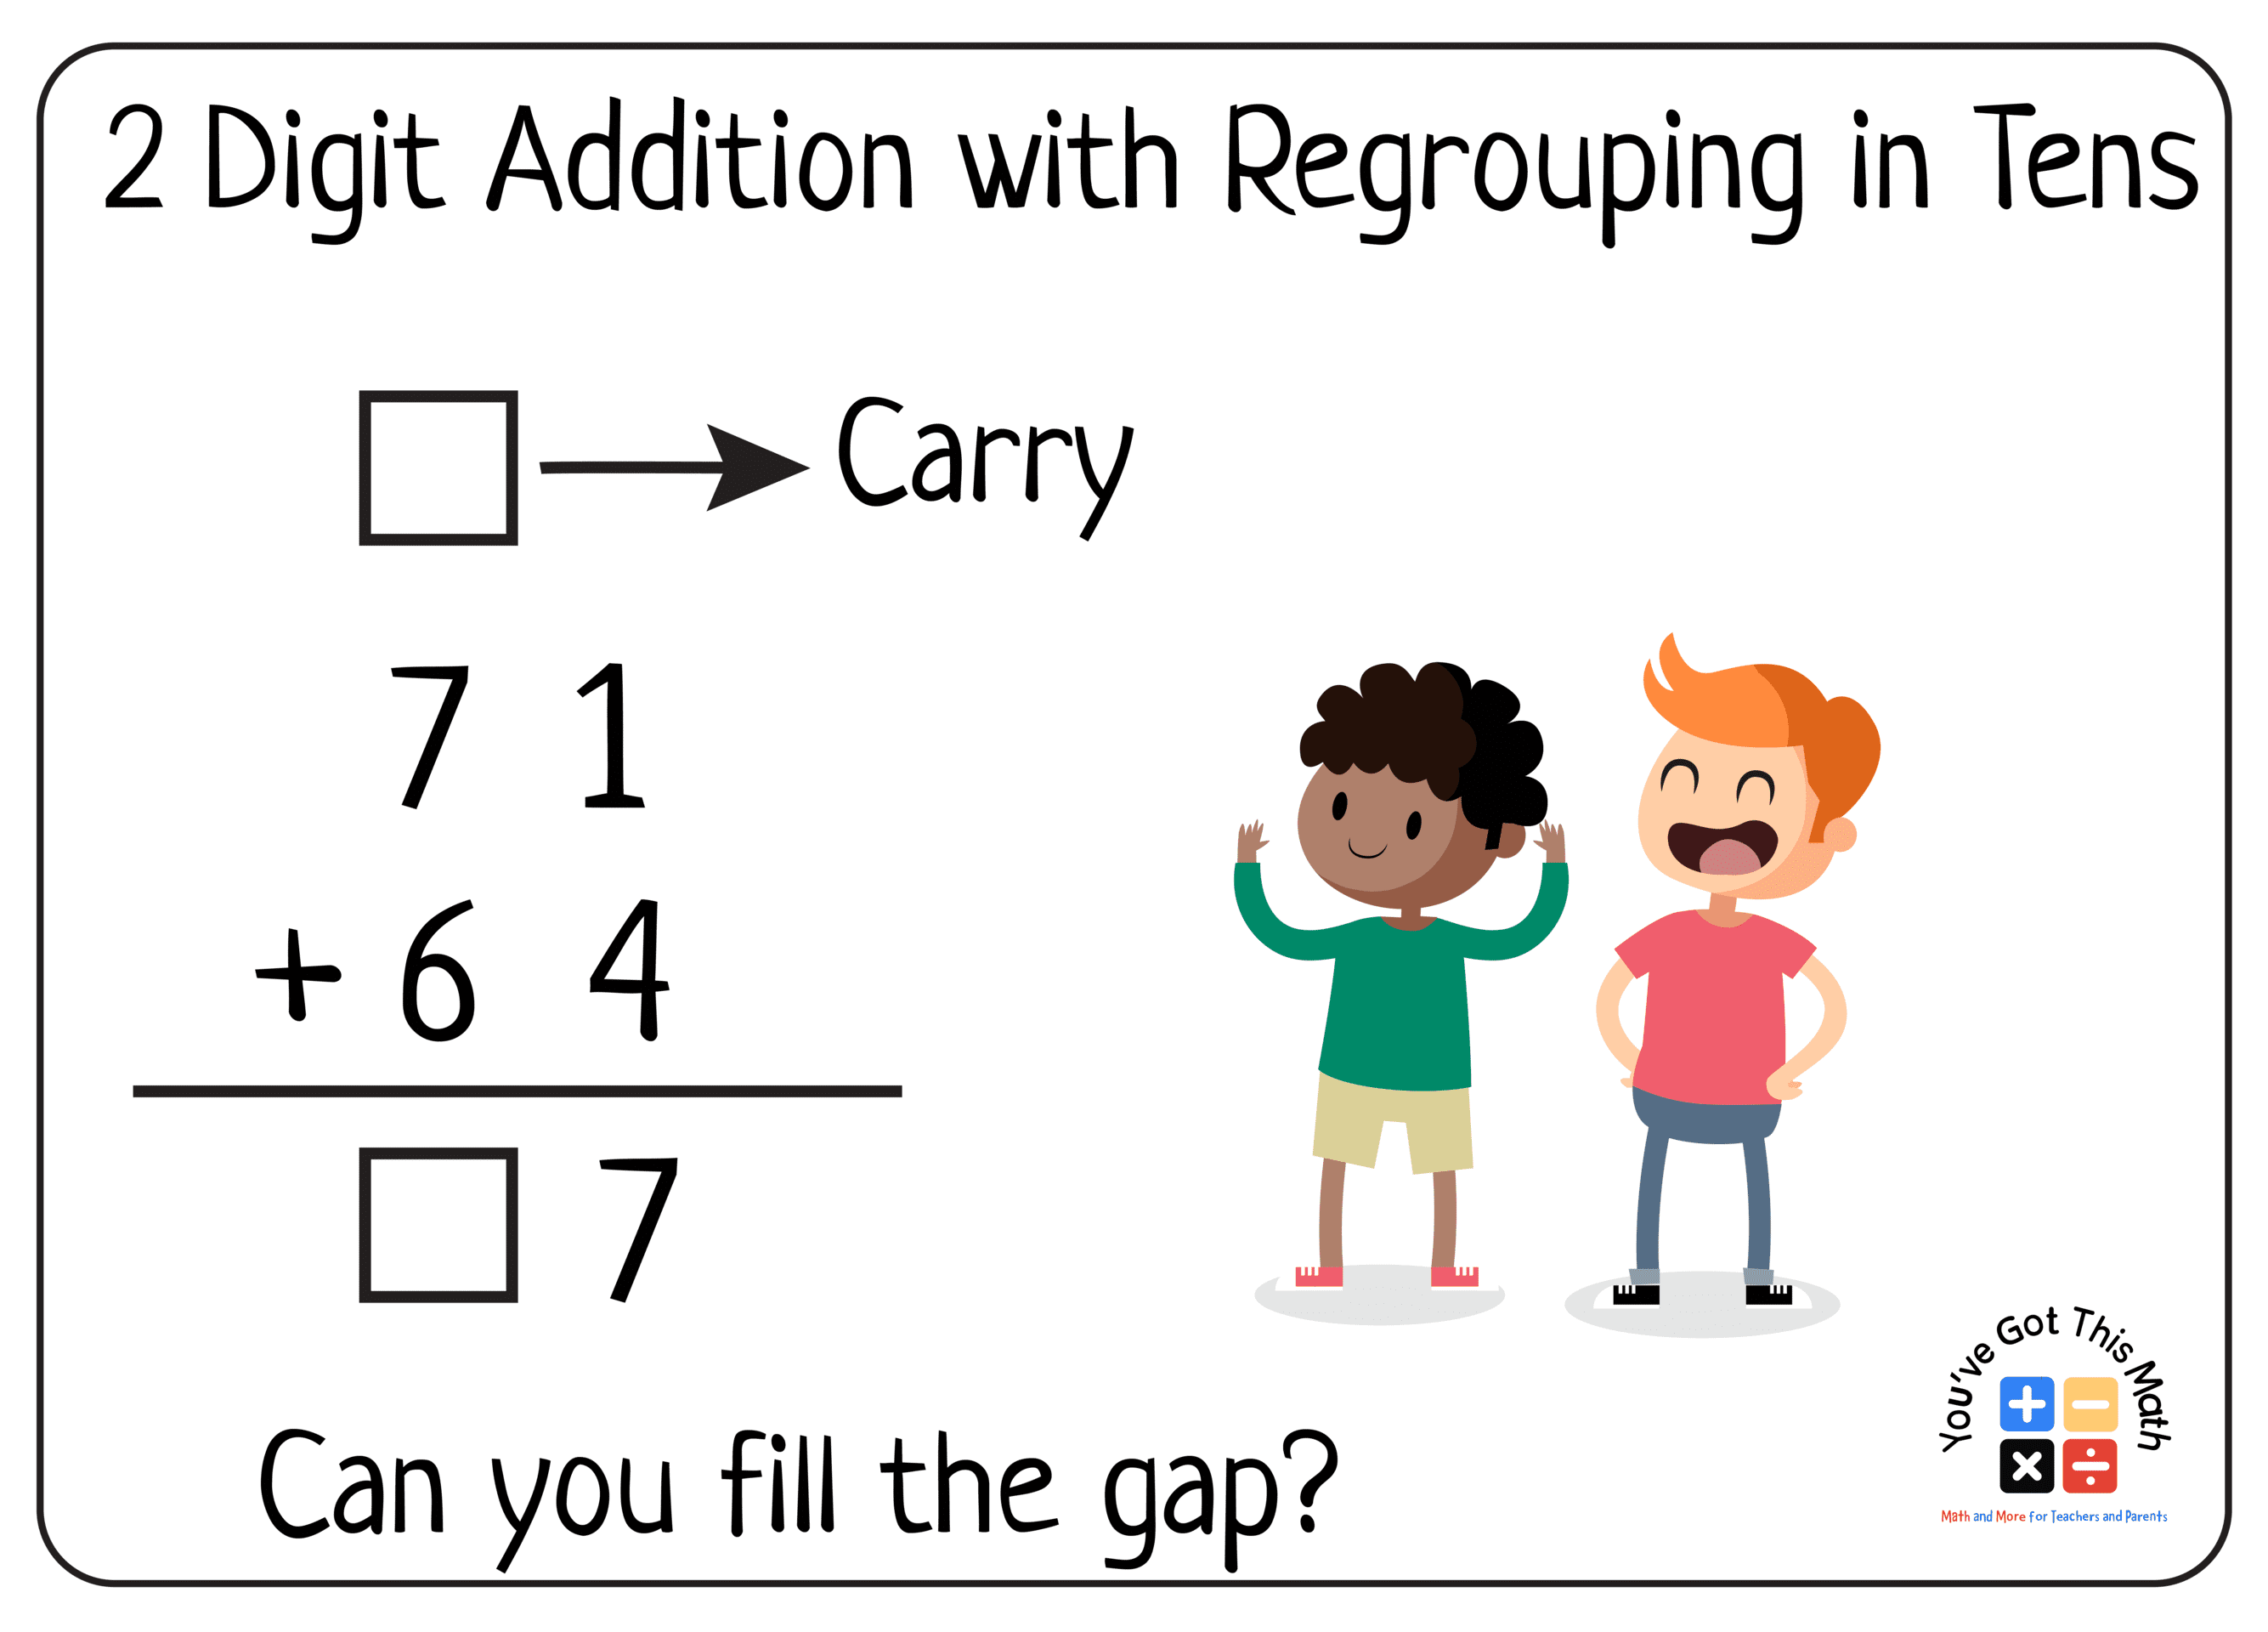 2 Digit Addition with Regrouping in Tens